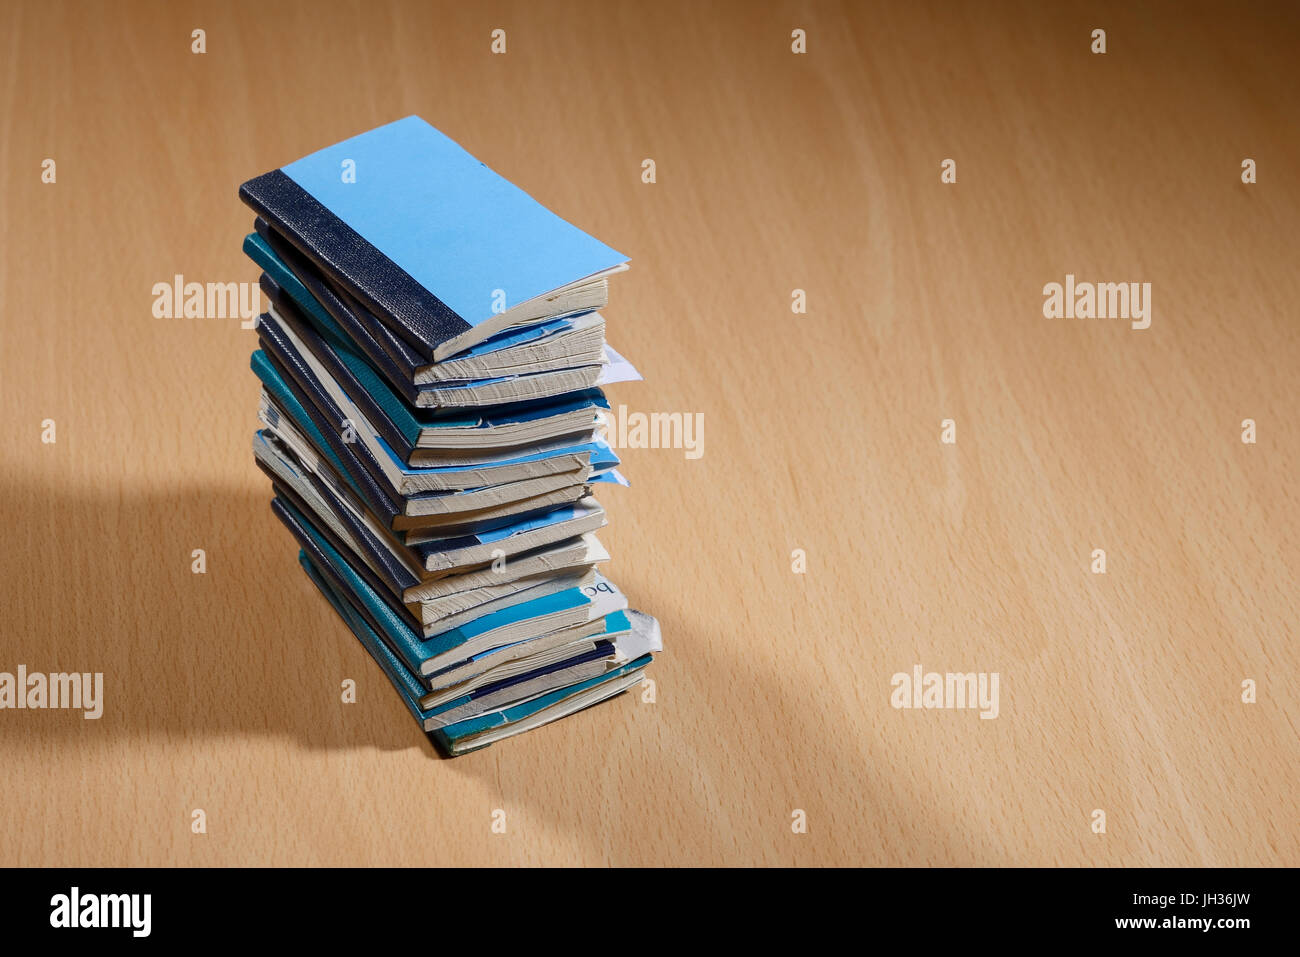 Barclays Bank cheque book stubs Stock Photo - Alamy